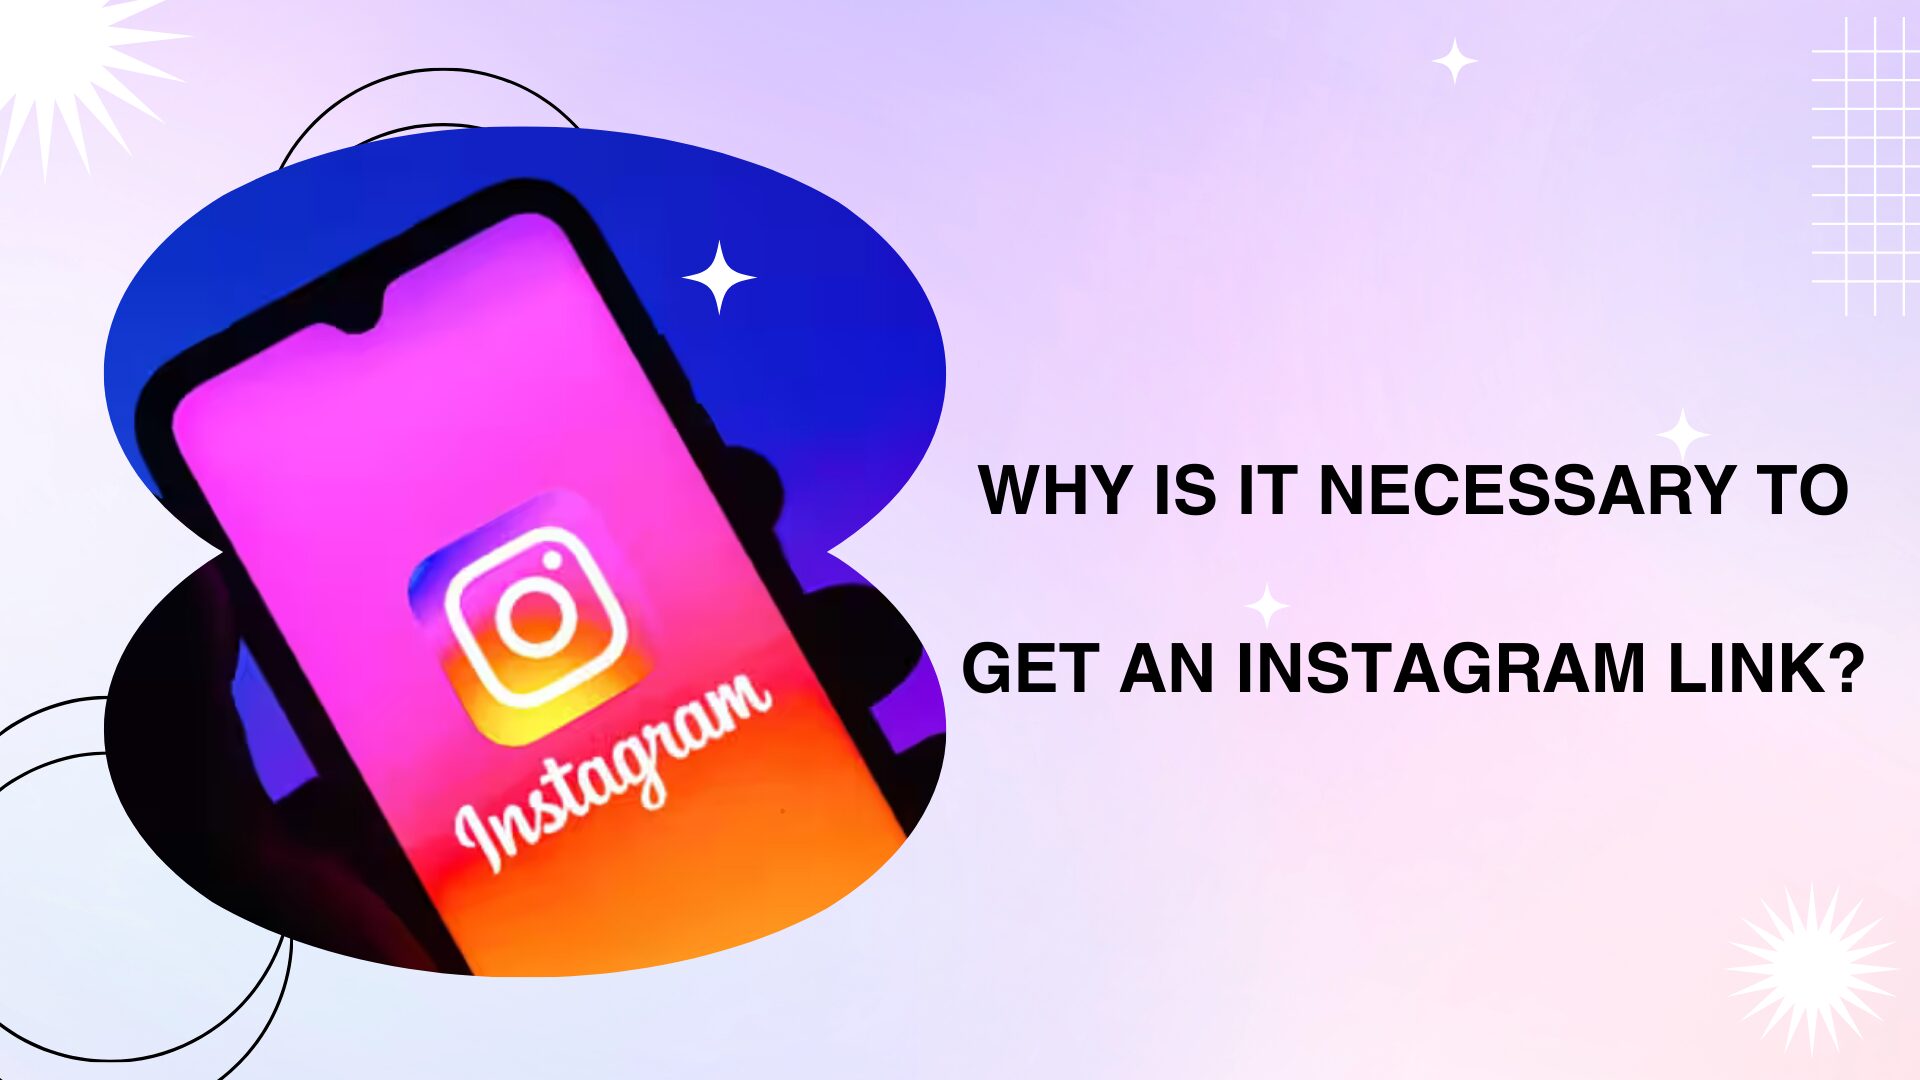 Why is it necessary to get an Instagram Link?